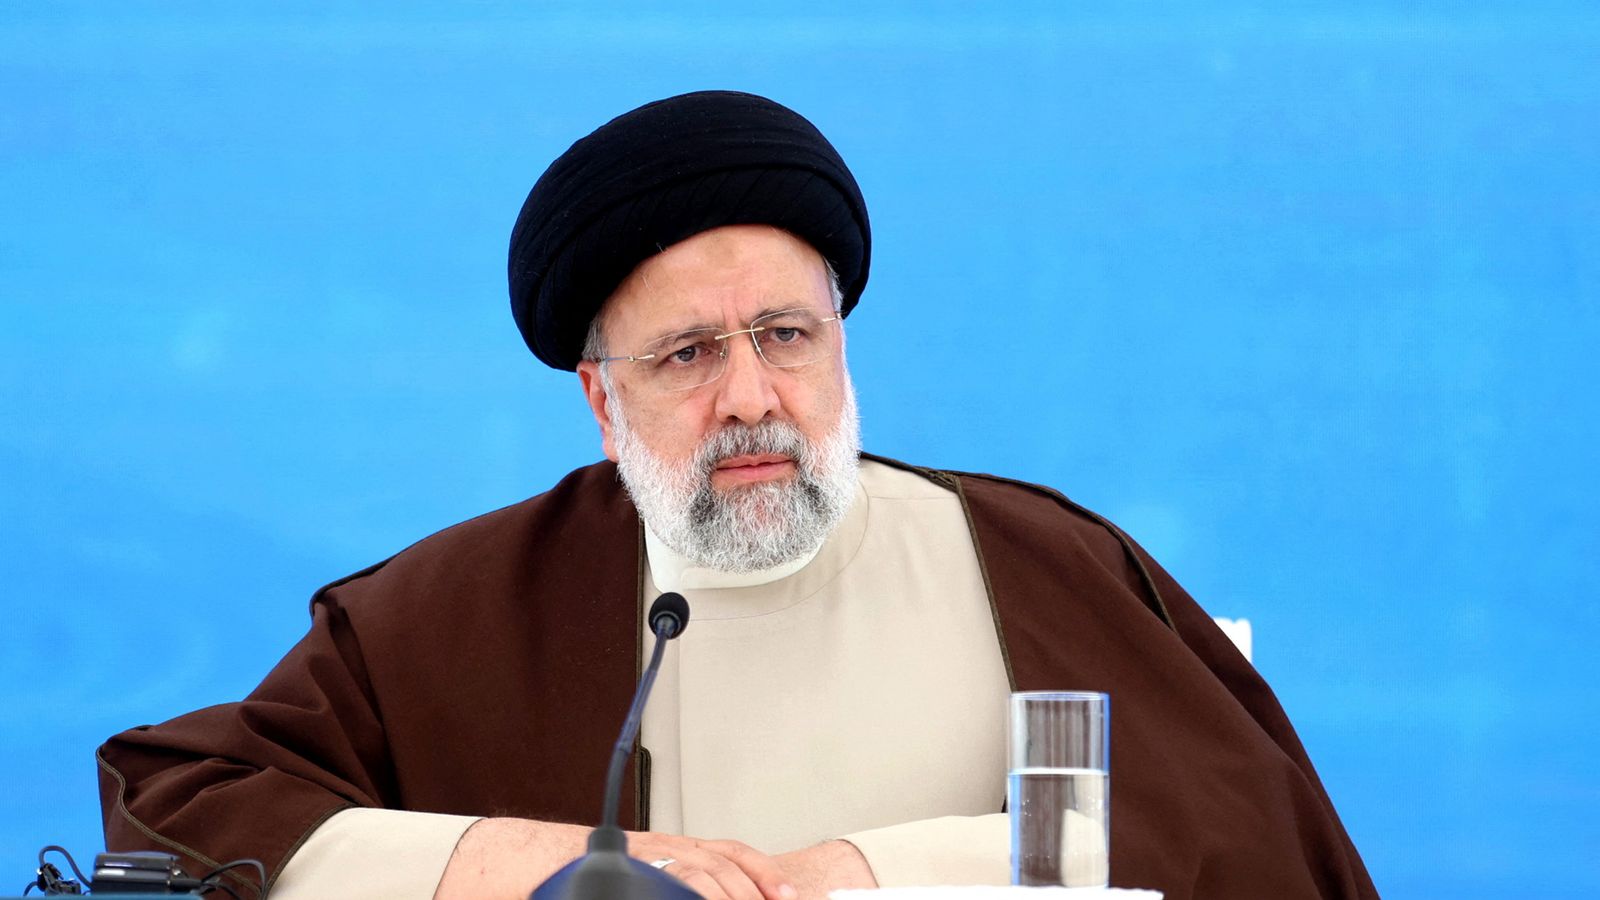 Iranian protesters express 'joy' over death of President Ebrahim Raisi in helicopter crash